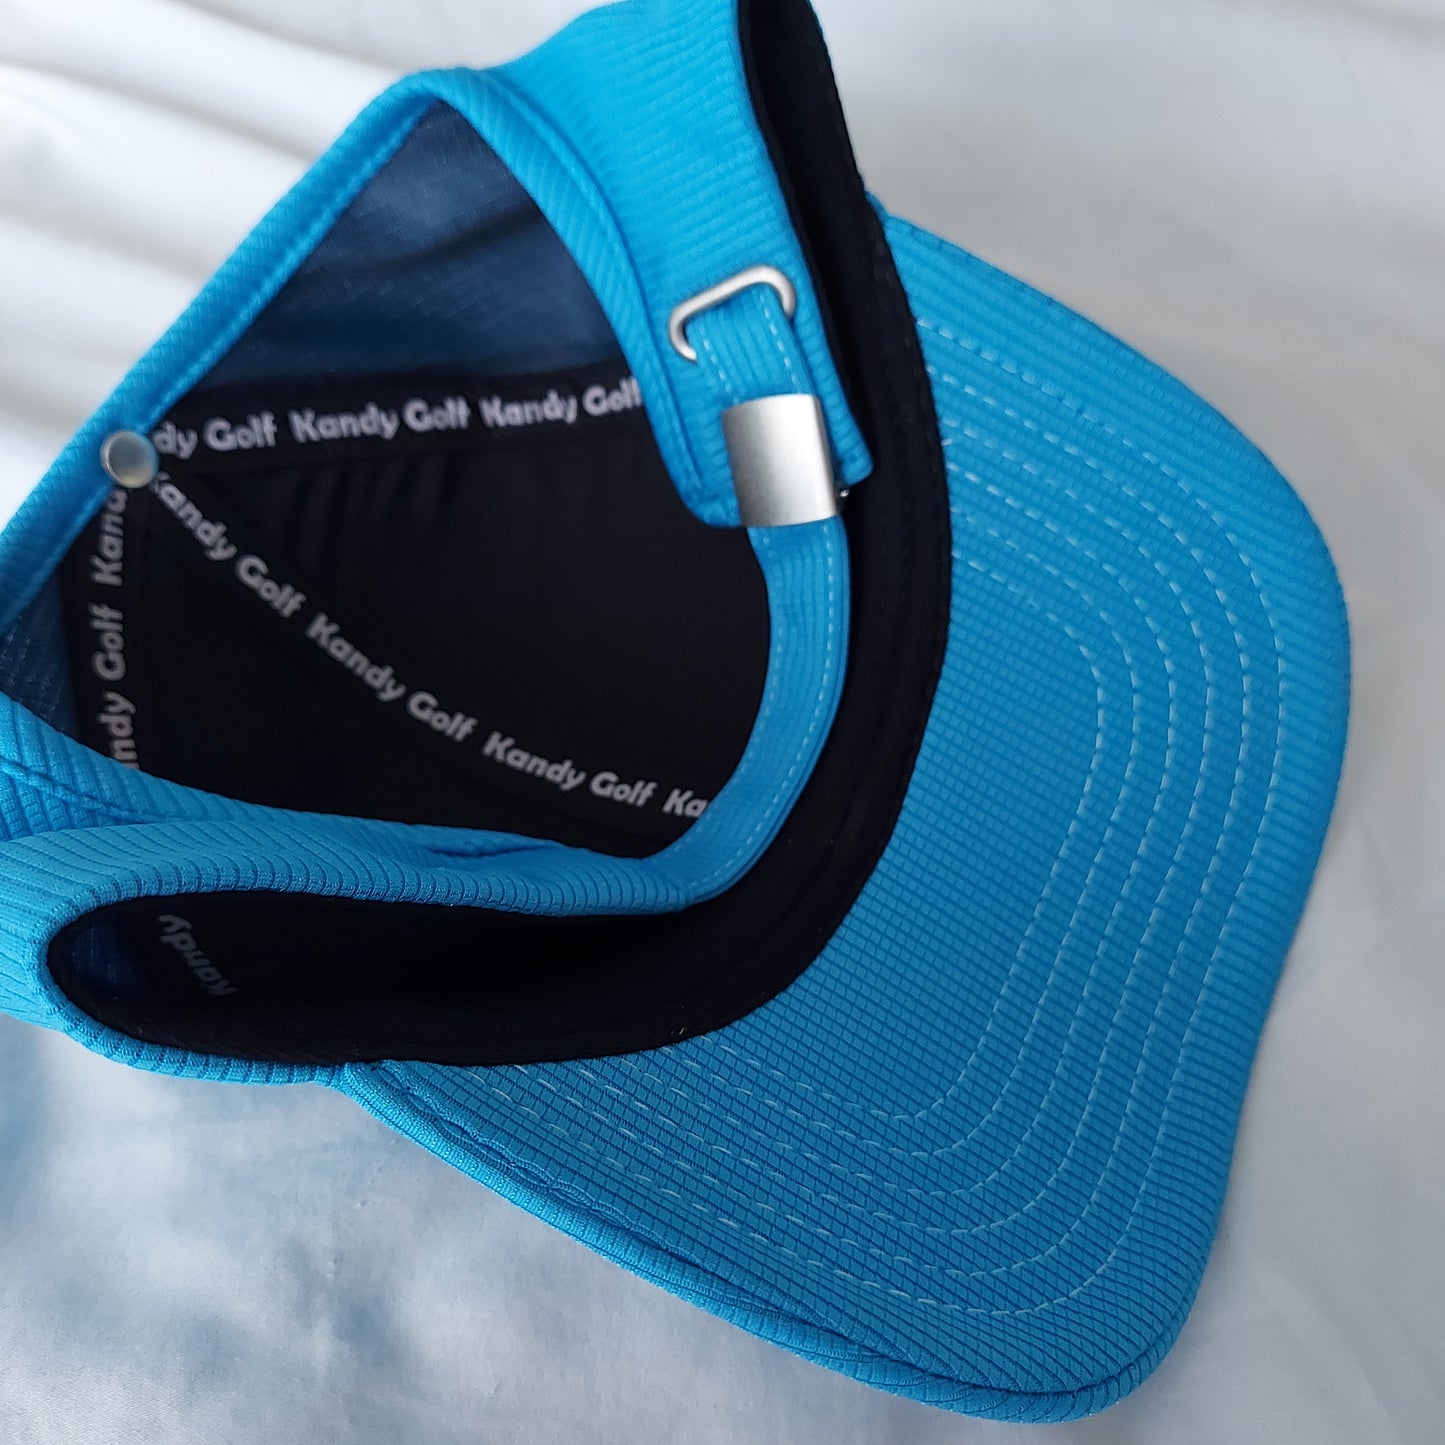 Kandy Golf Assorted Unisex and Visor/ Open back Hats